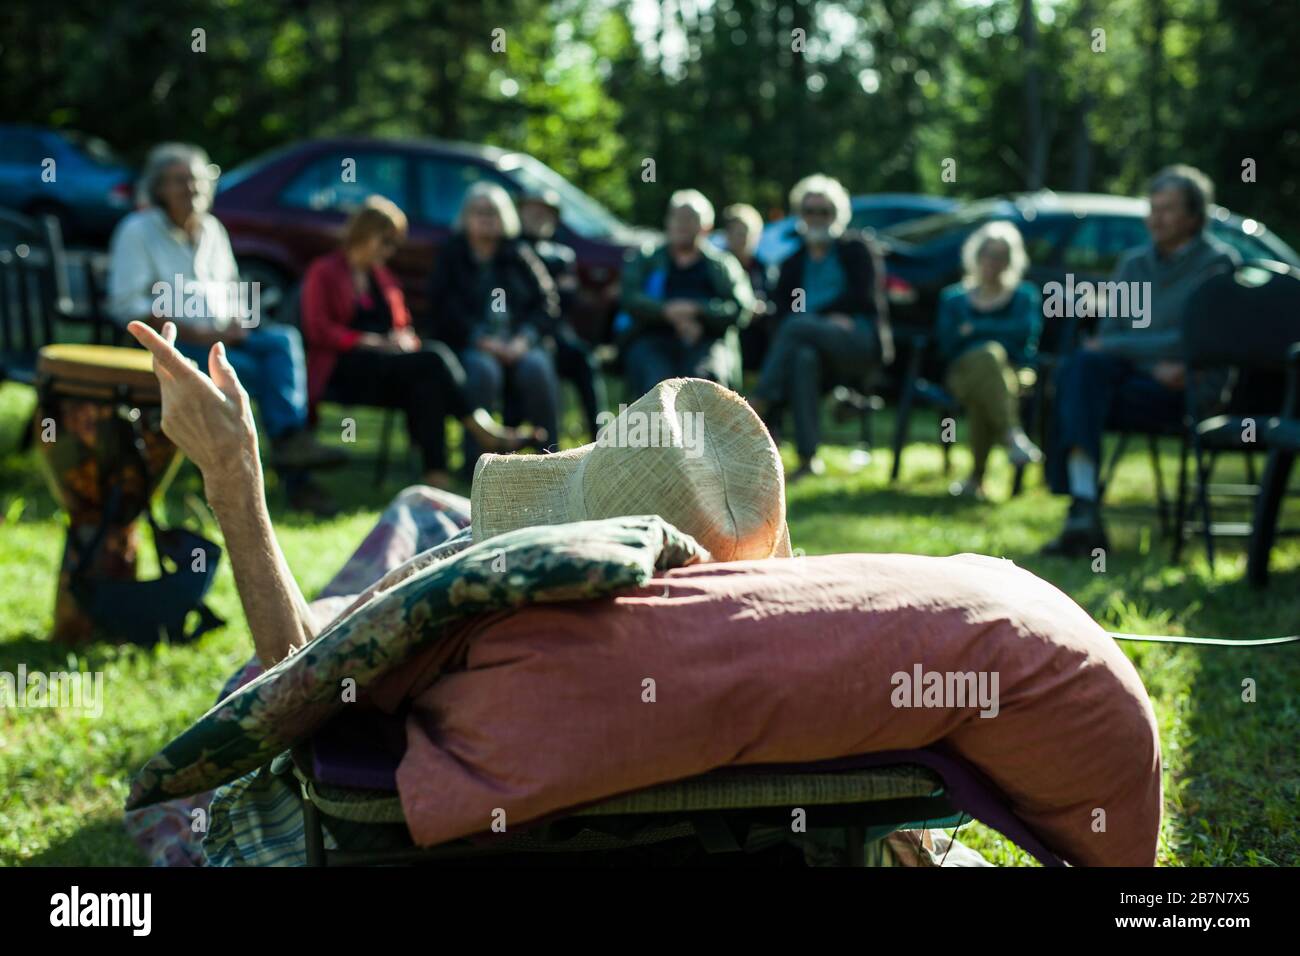 A close up shallow focus view from behind a terminally ill frail man lying on a sun lounger in garden during a party celebrating his life with copy space. Stock Photo